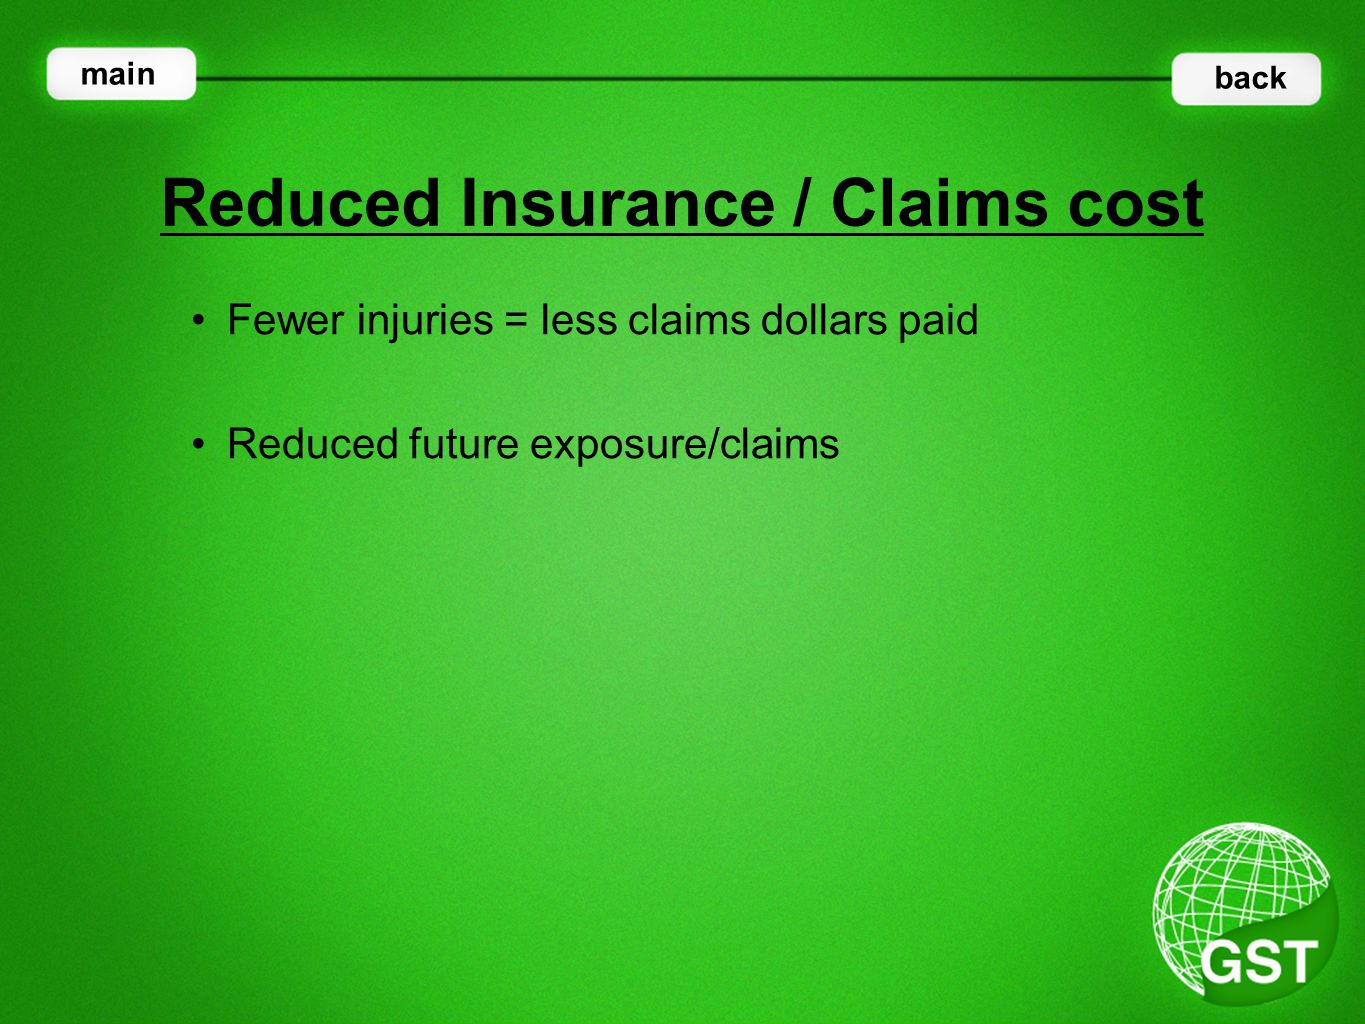 Fewer injuries = less claims dollars paid Reduced Insurance / Claims cost main back Reduced future exposure/claims